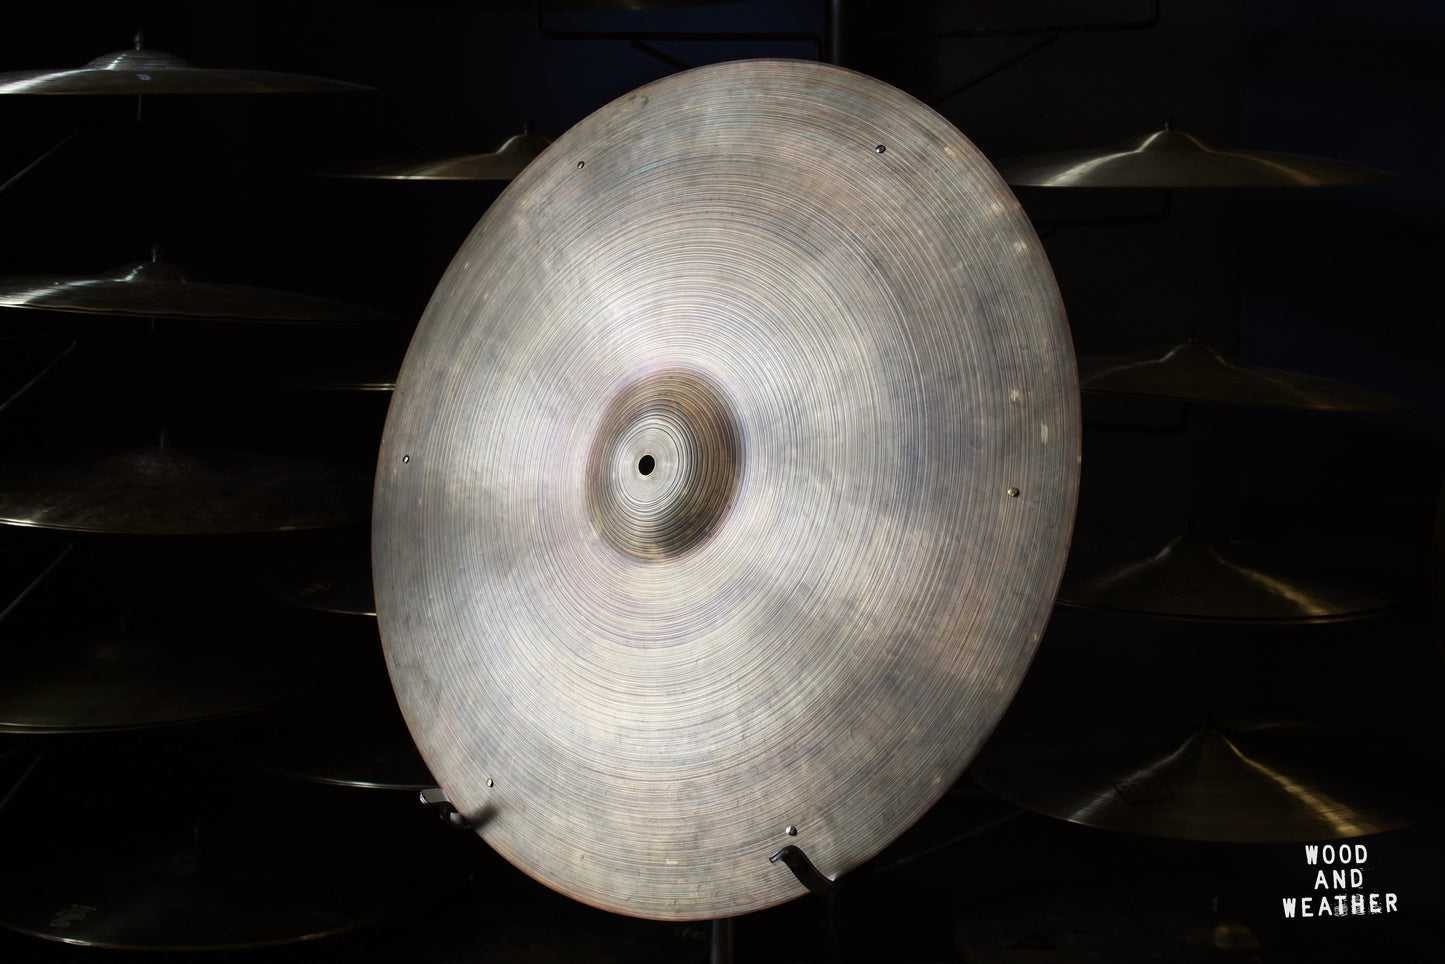 Used Cymbal & Gong Holy Grail 22" Ride Cymbal w/ Rivets 2160g